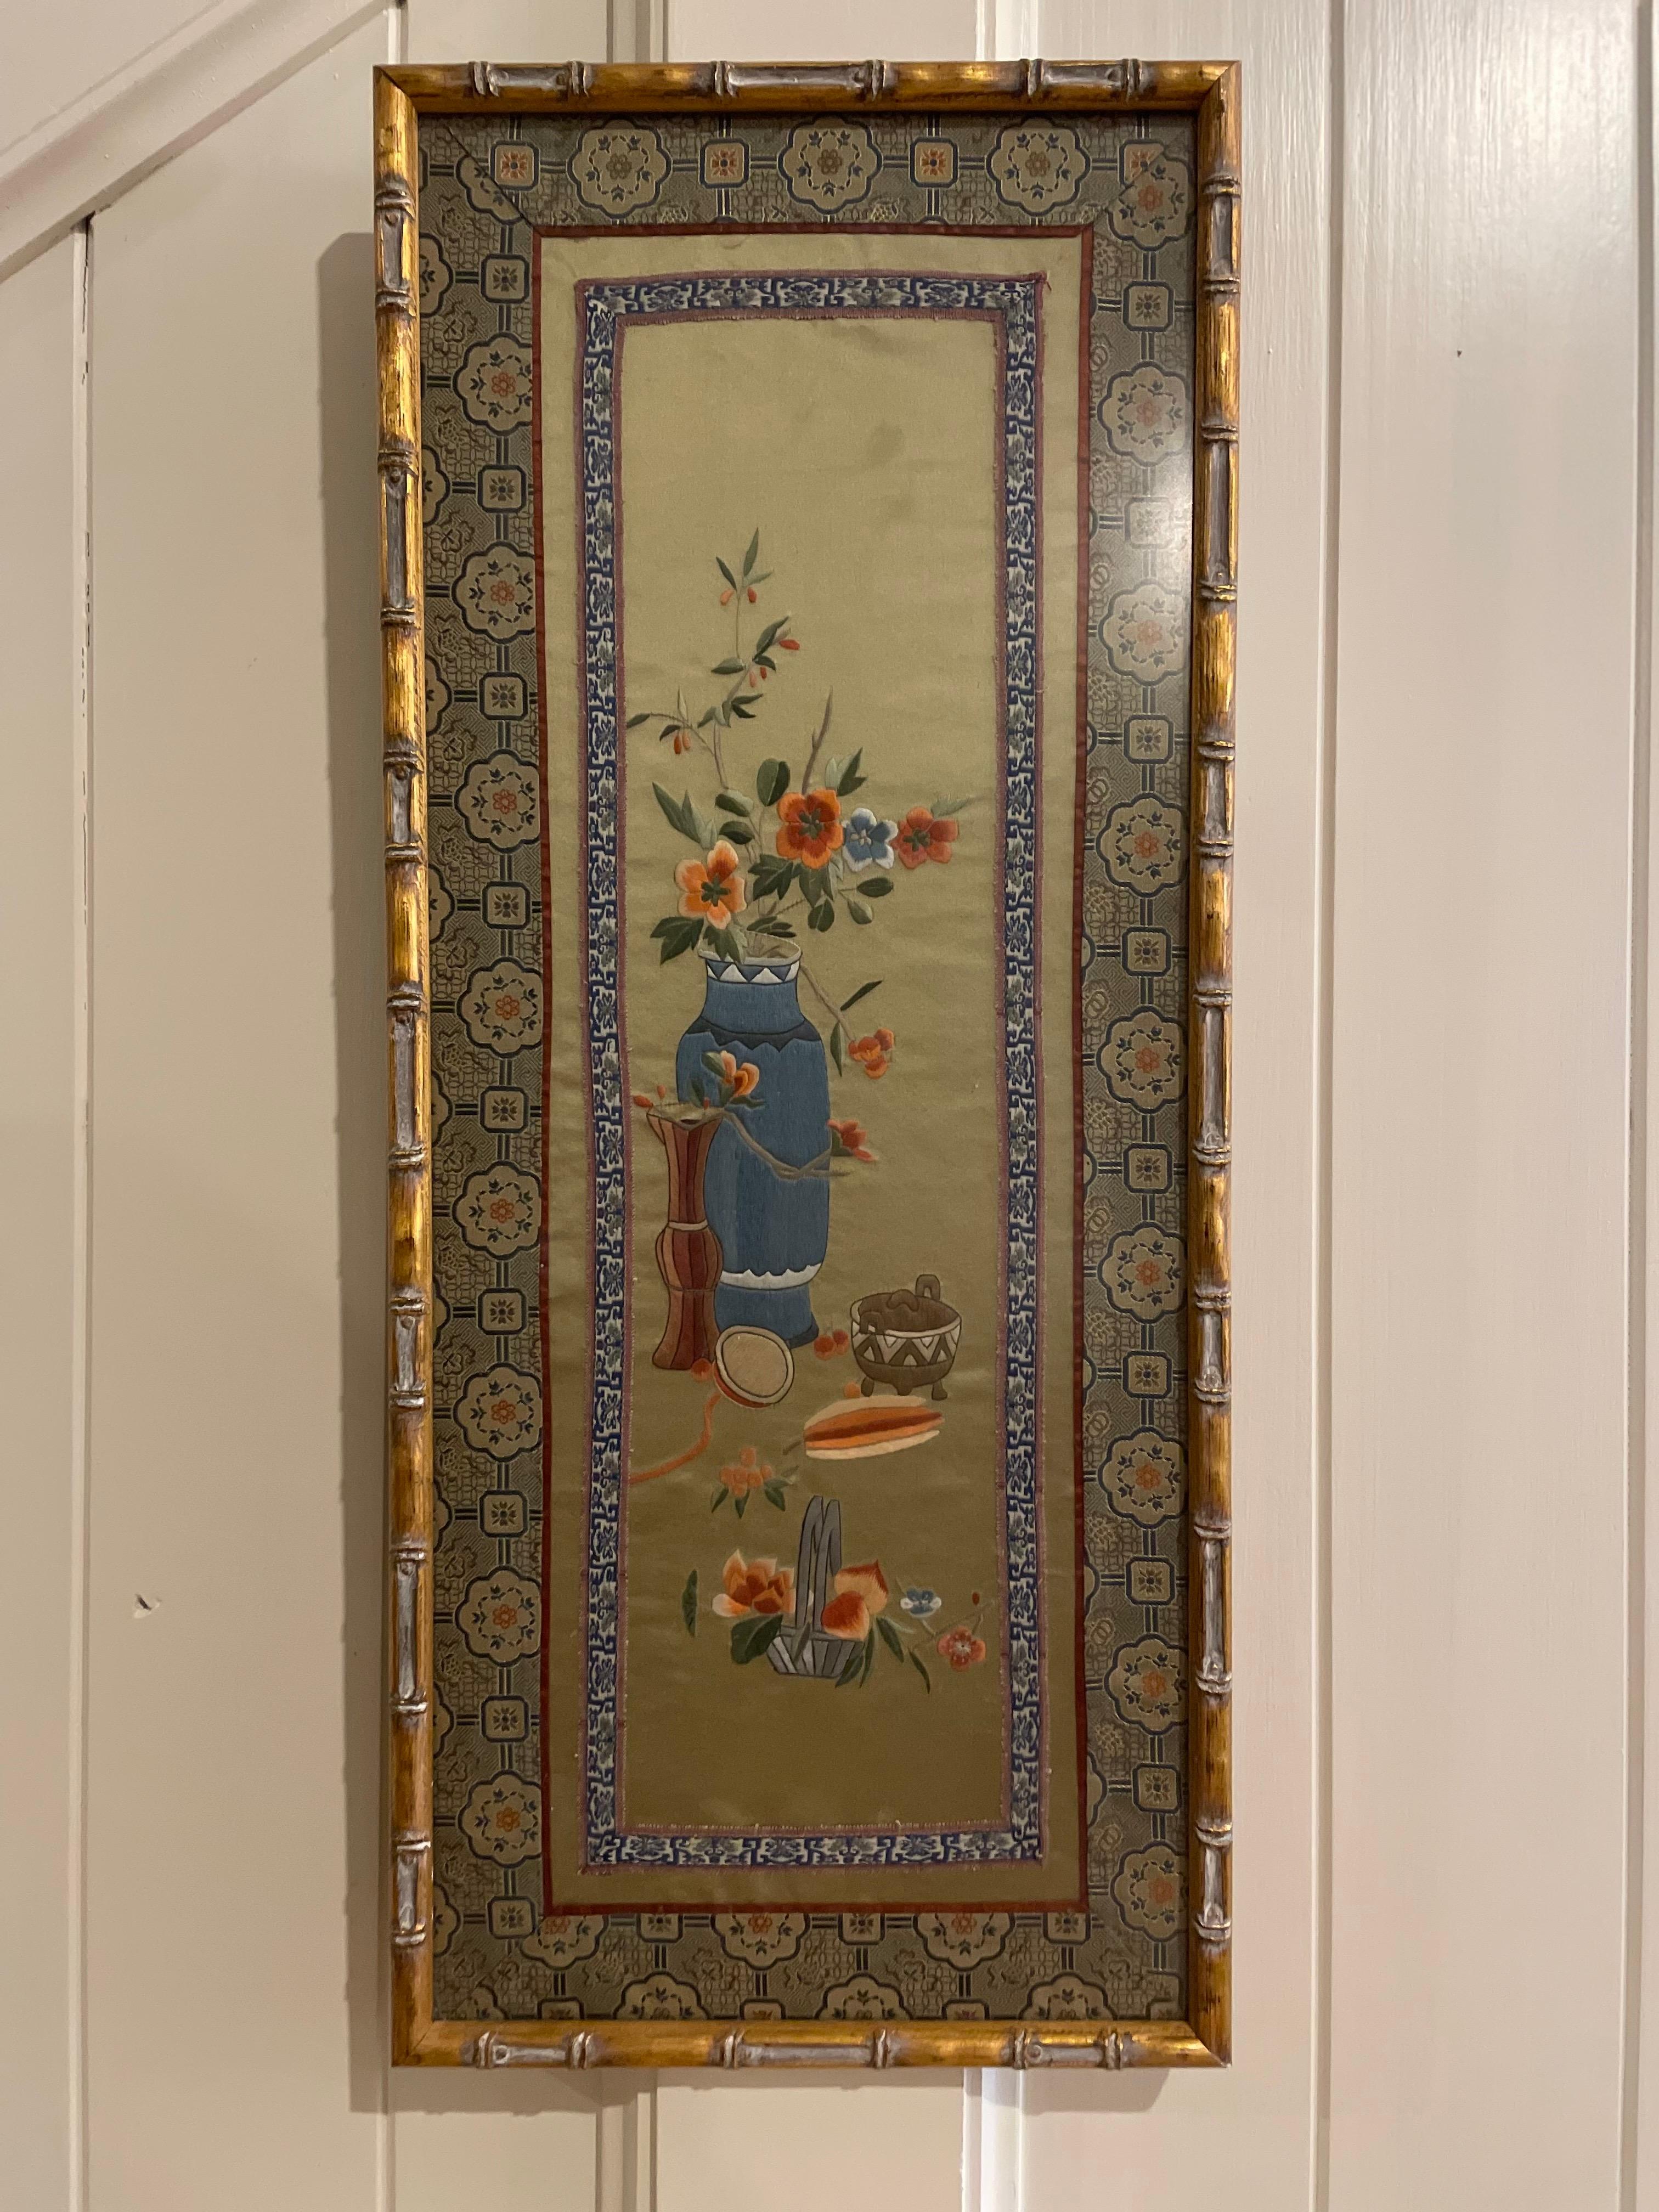 A long tall beautiful rectangular framed Chinese silk tapestry. A lovely addition to any wall. This tapestry portion of this piece is framed inside of a gold bamboo wood frame. The tapestry itself is exquisite. The center of this long silk panel is